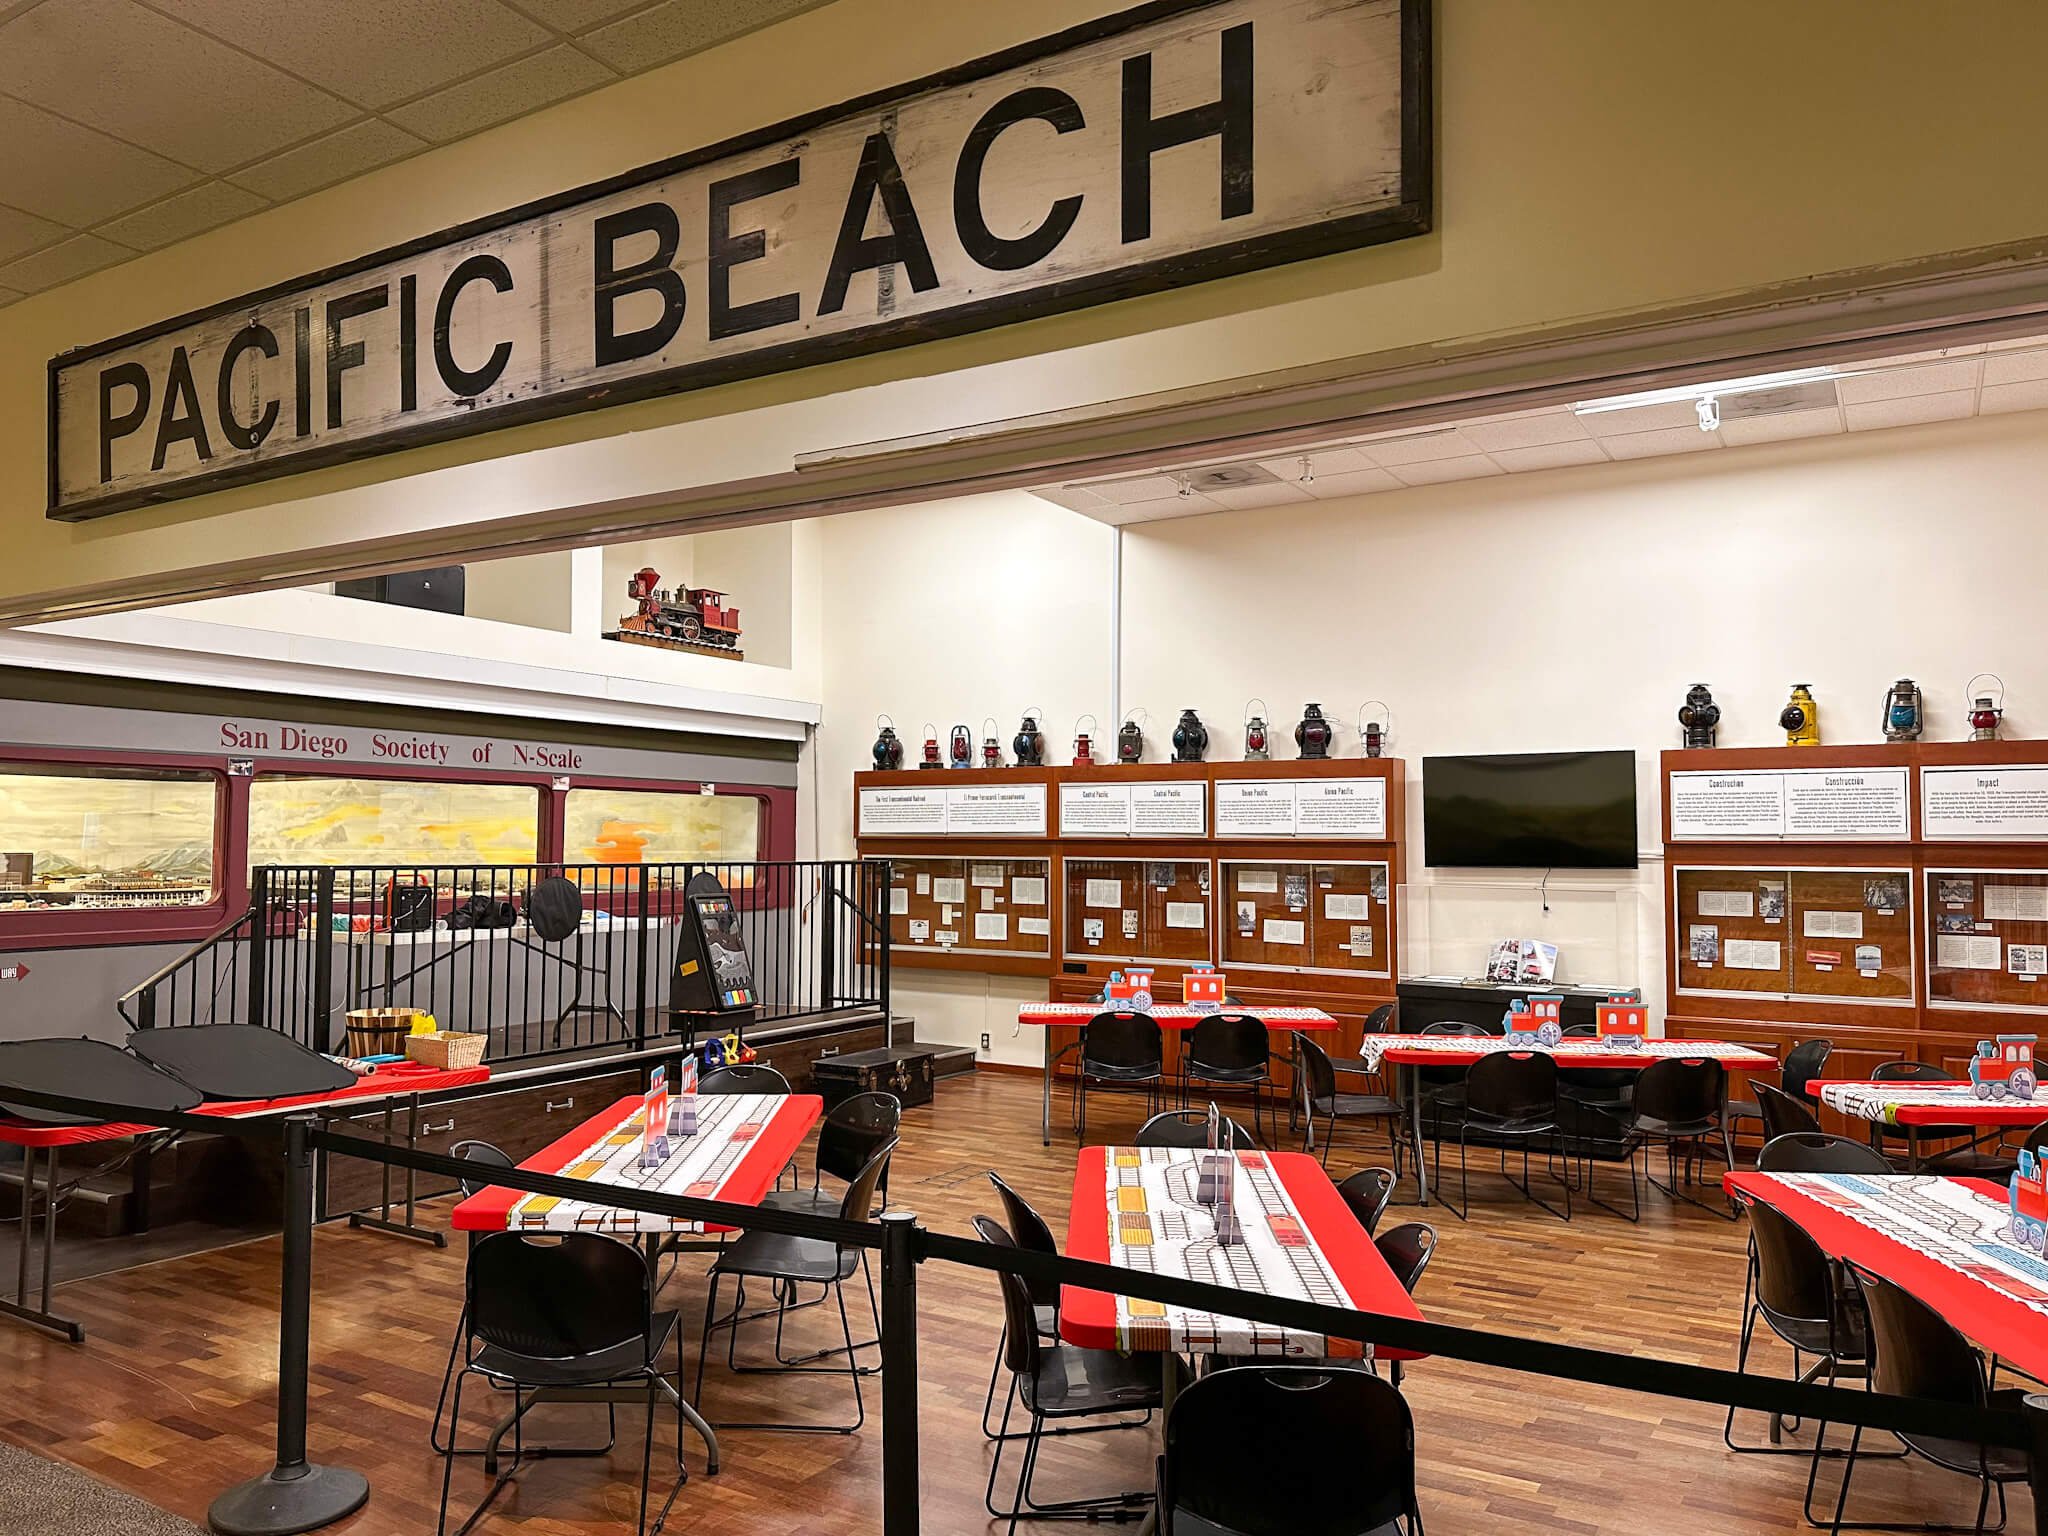  a wide shot of a train-themed birthday party with a sign that says “Pacific Beach” 